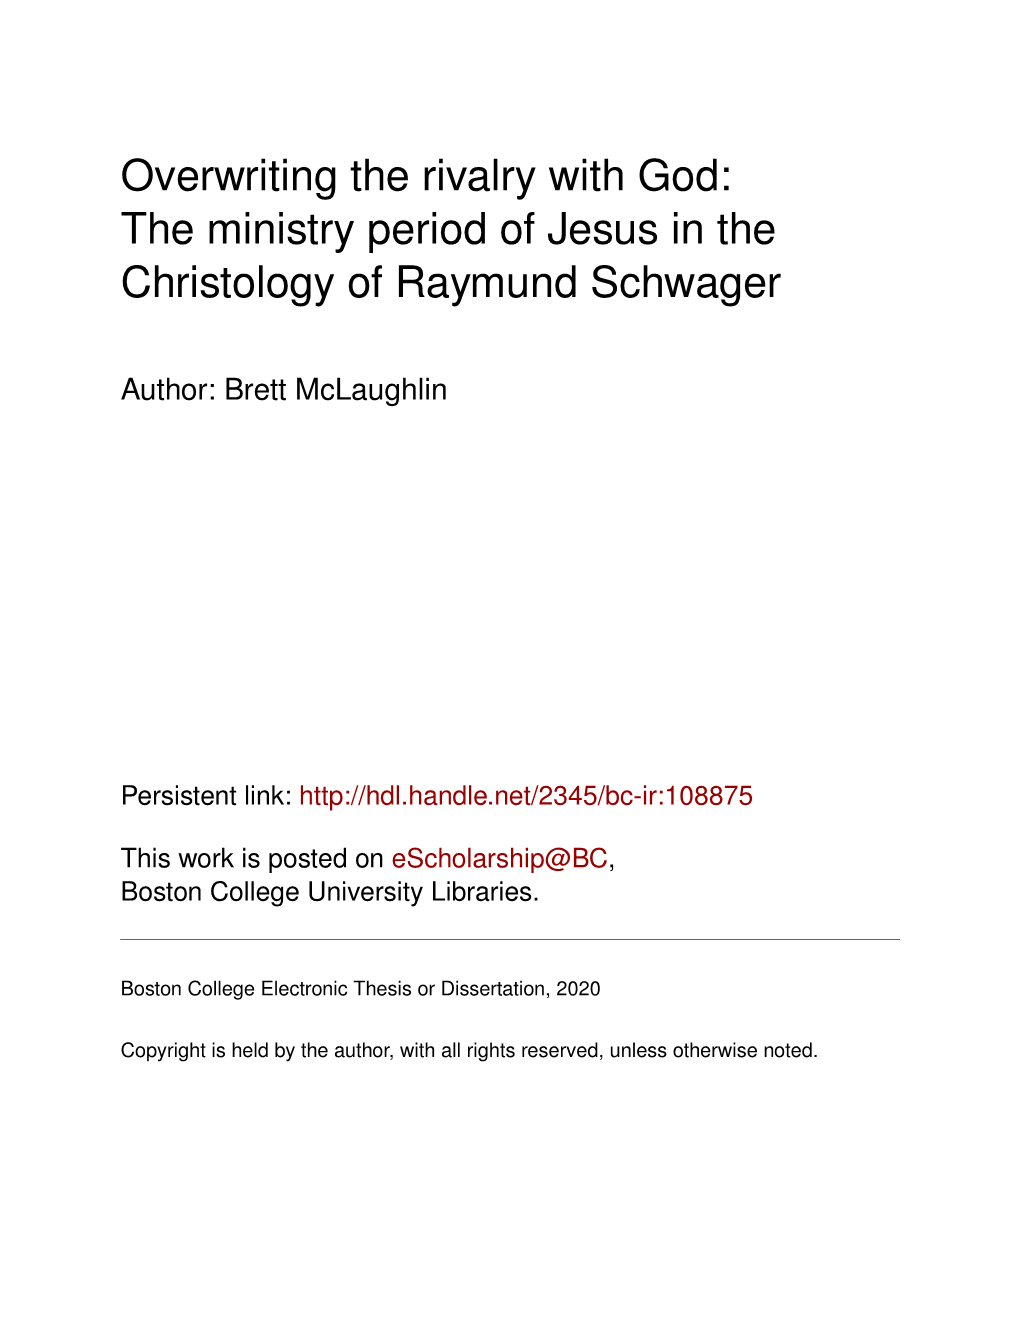 The Ministry Period of Jesus in the Christology of Raymund Schwager